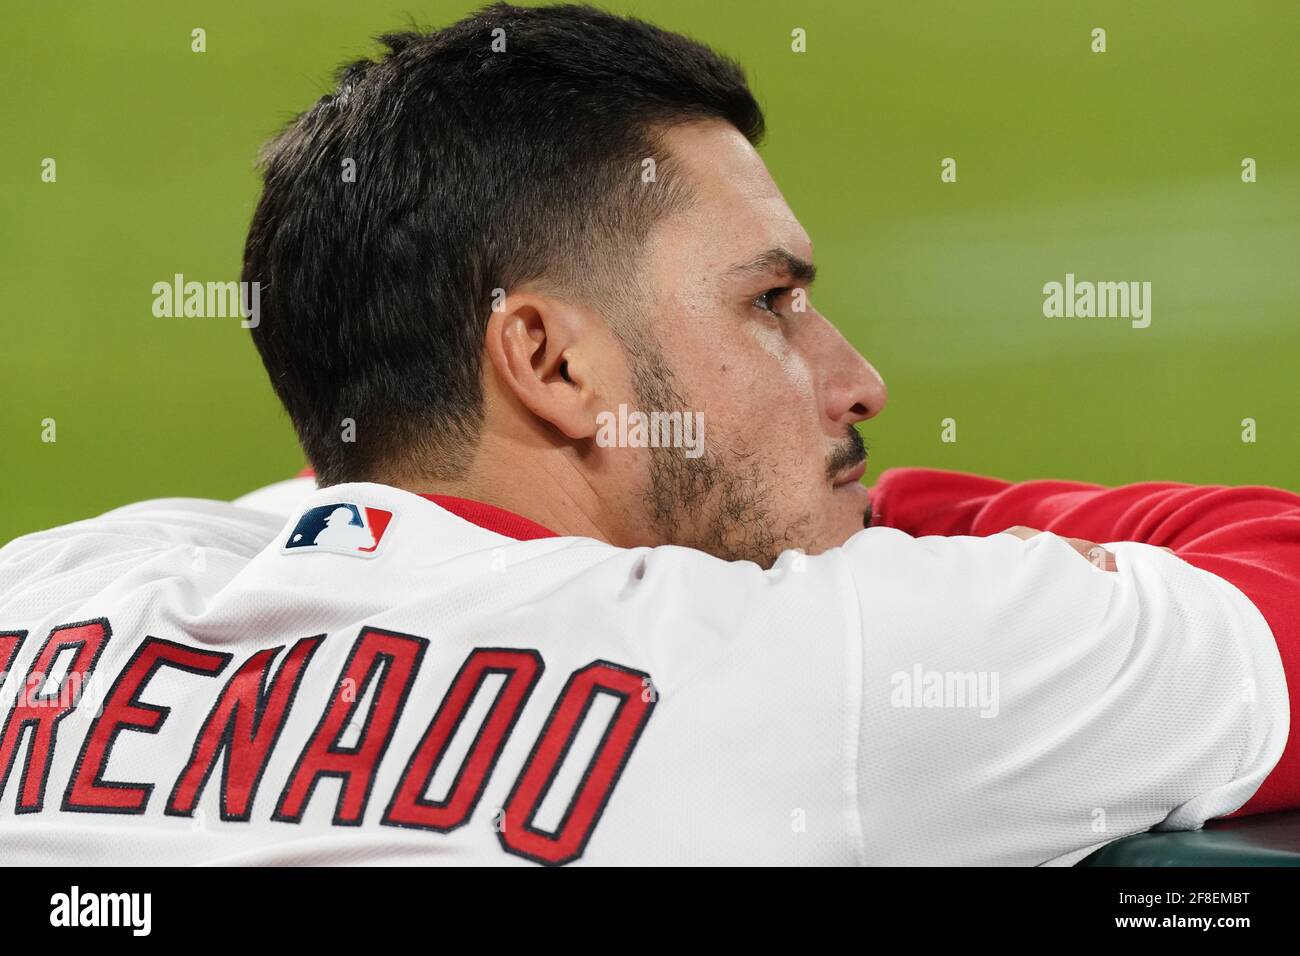 St. Louis, United States. 13th Apr, 2021. St. Louis Cardinals Nolan Arenado  watches the action against the Washington Nationals, from the dugout in the  third inning at Busch Stadium in St. Louis